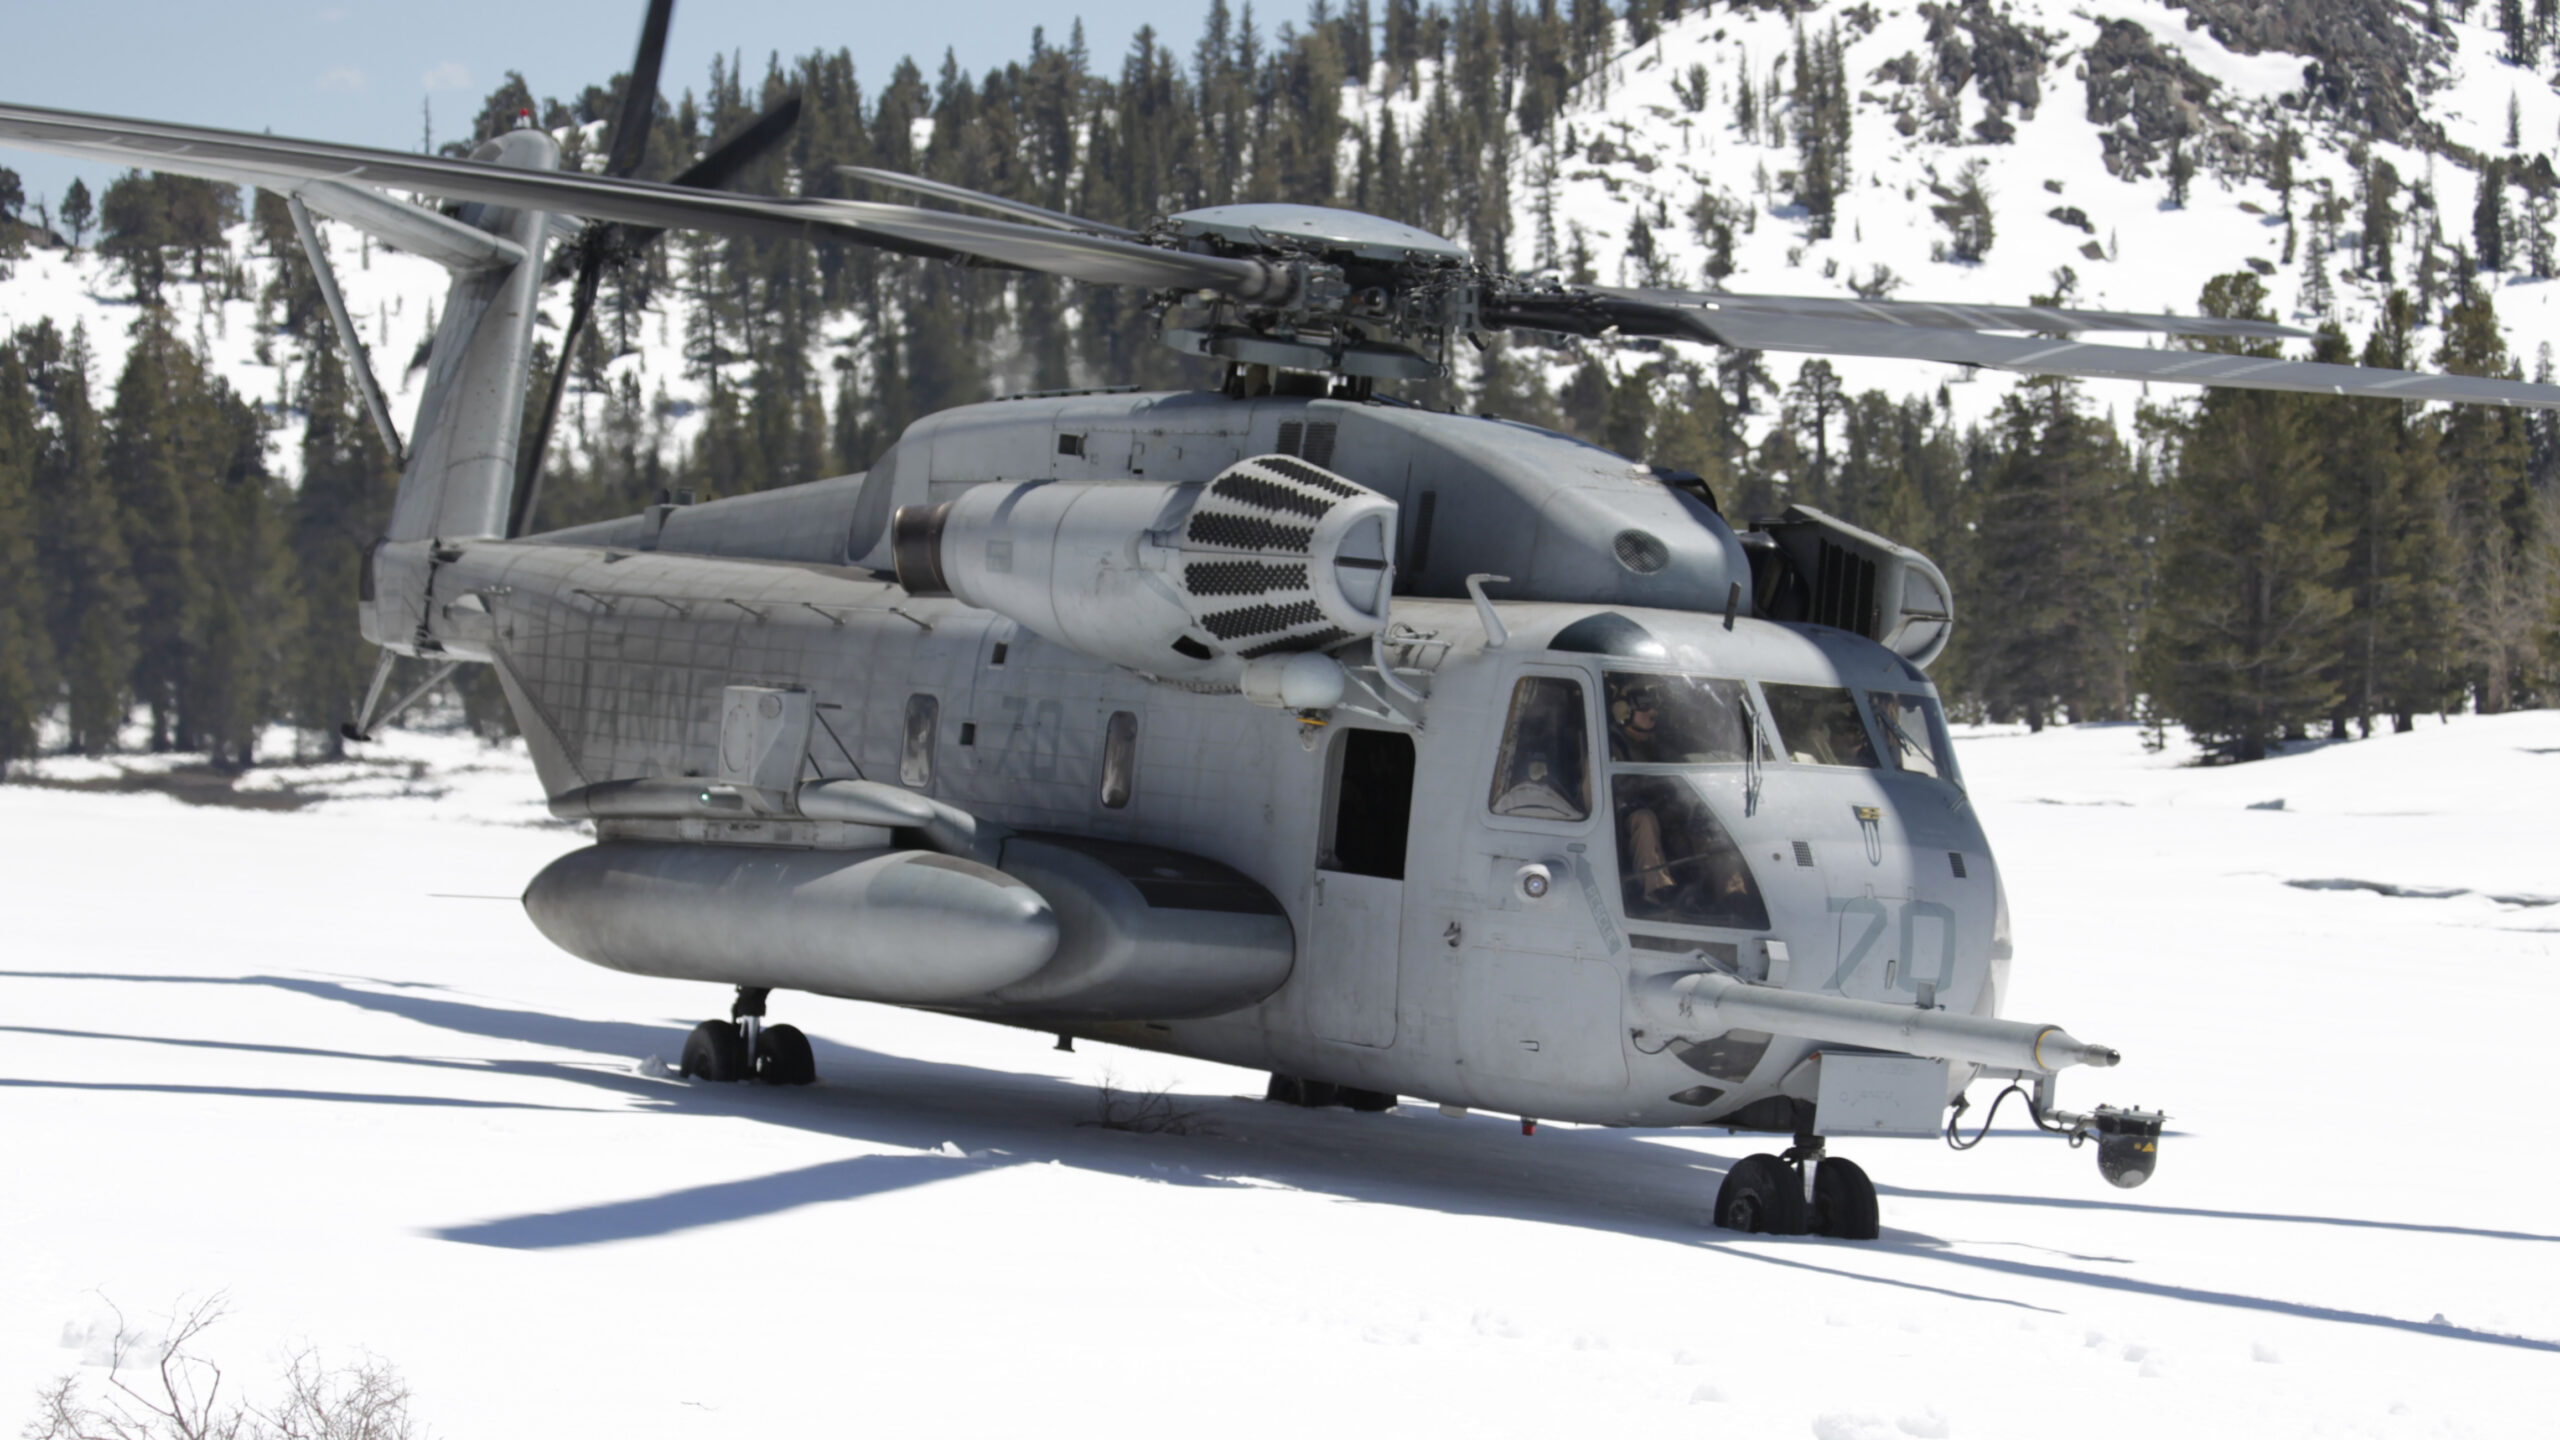 A CH-53E Super Stallion crew from Marine Heavy Helicopter Squadron 361 test their aircraft on snowy terrain at Marine Corps Mountain Warfare Training Center Bridgeport, Calif., May 20, 2011. For many of the Marines, this was the first time they landed in snow.